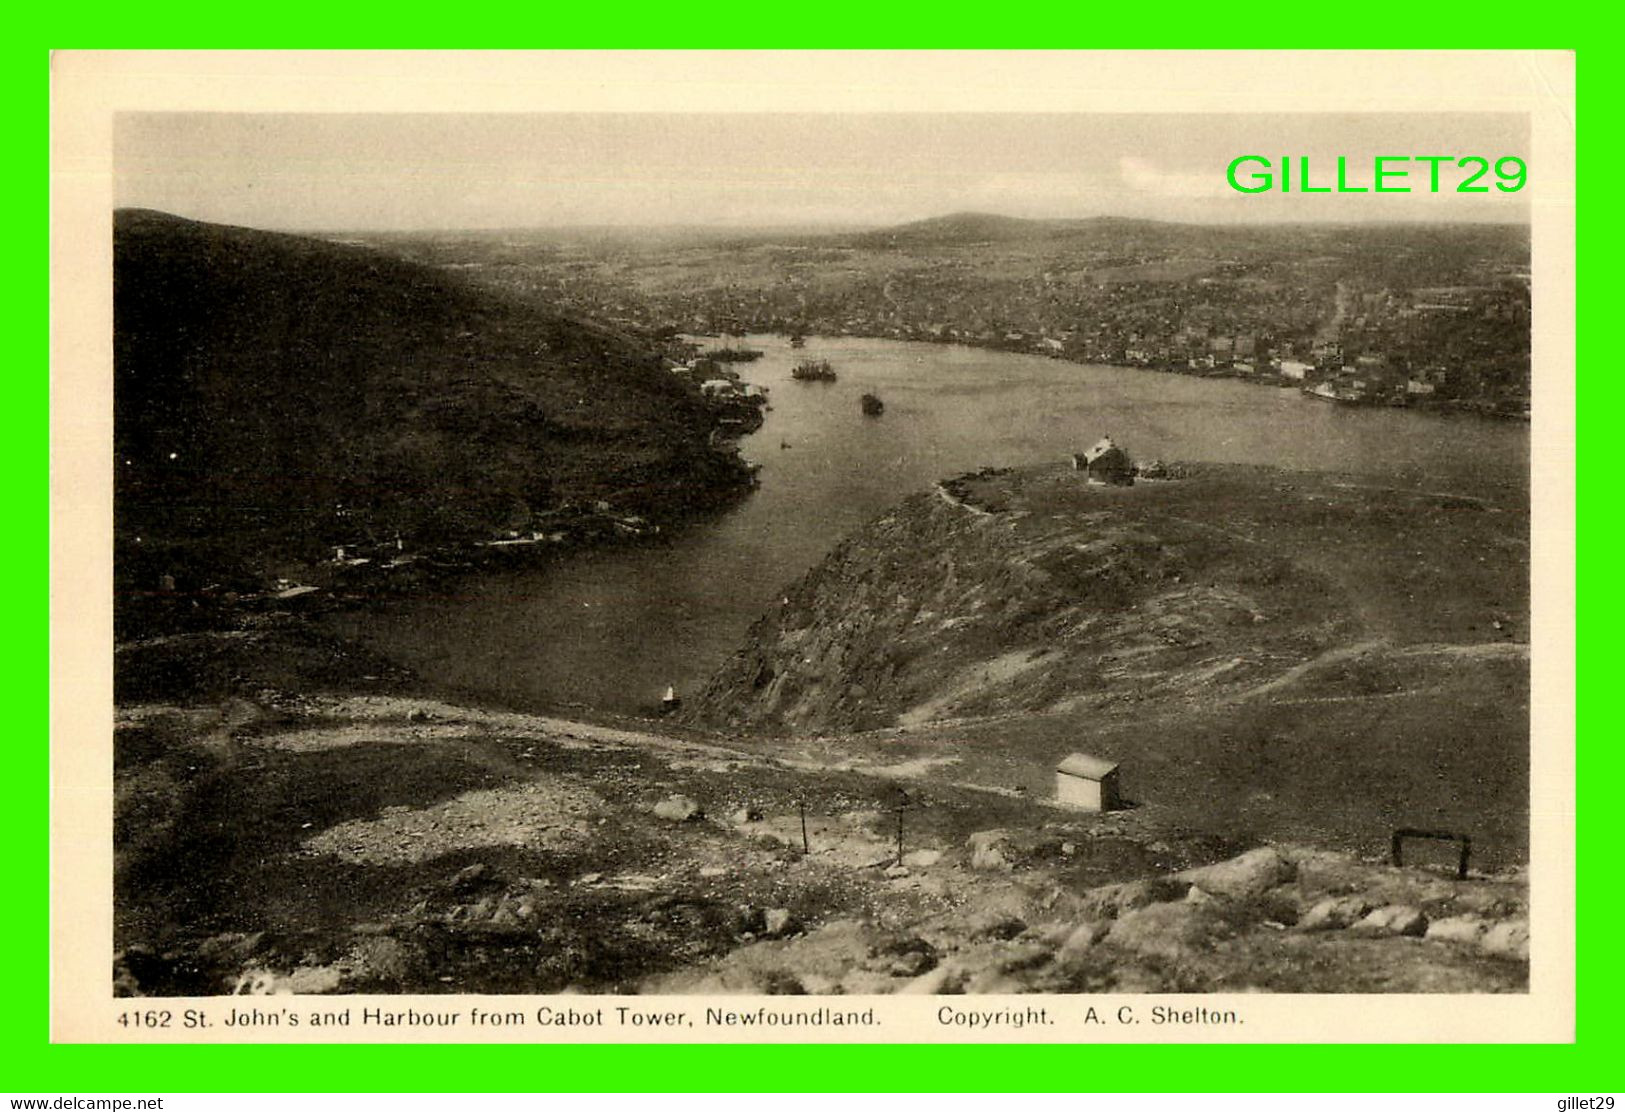 ST JOHN'S, NEWFOUNDLAND - THE CITY & HARBOUR FROM CABOT TOWER - A. C. SHELTON - PECO - - St. John's